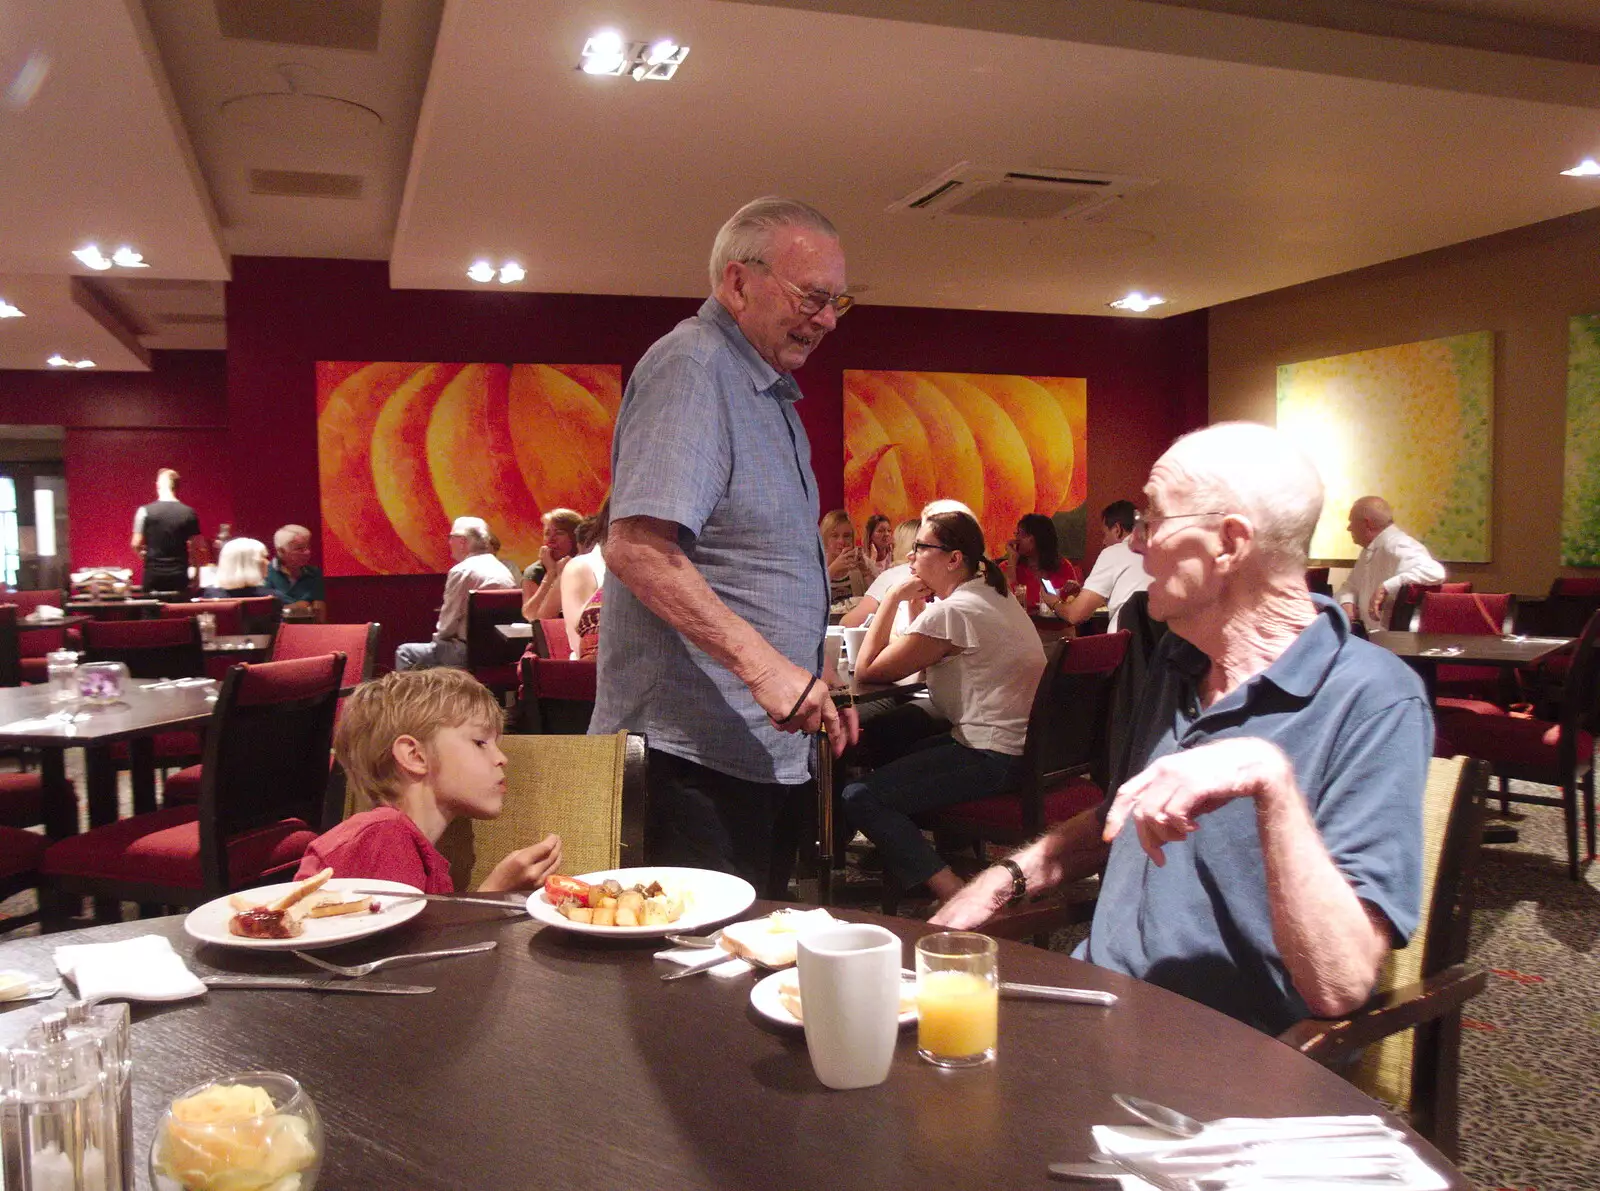 One of Grandad's mates comes over for a chat, from Kenilworth Castle and the 69th Entry Reunion Dinner, Stratford, Warwickshire - 14th September 2019